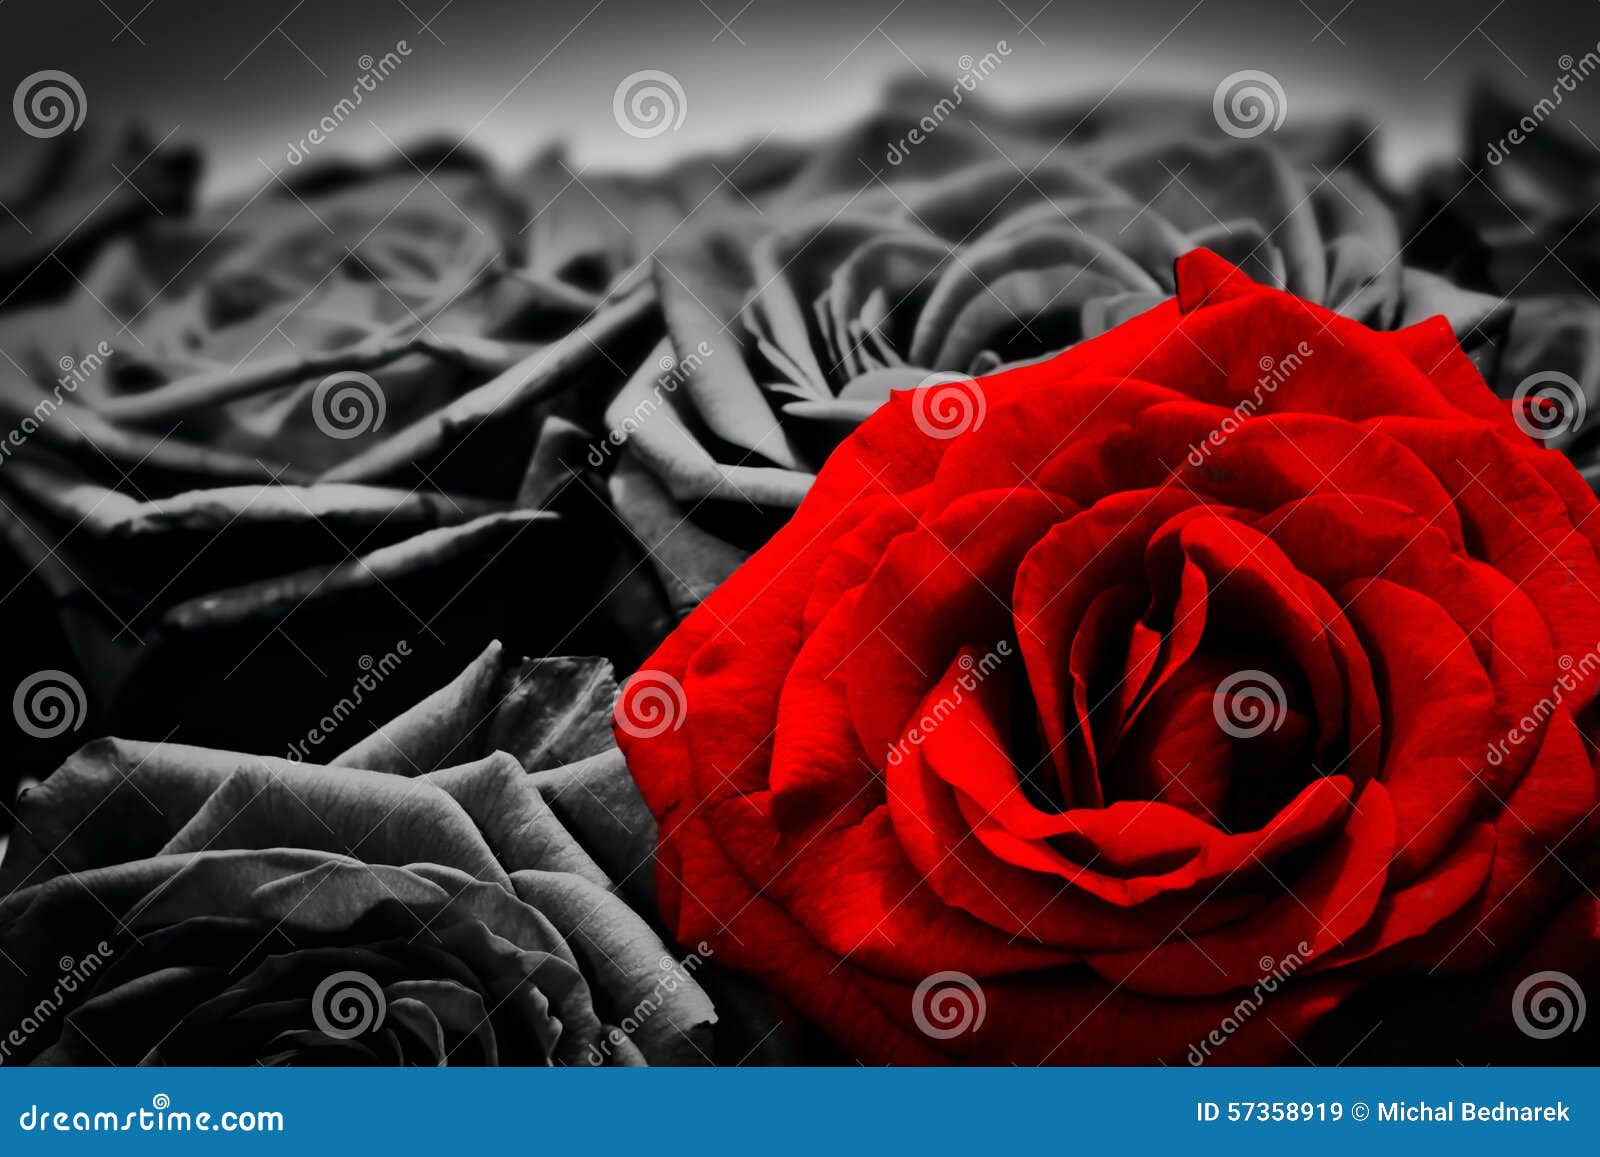 romantic greeting card of red rose against black and white roses